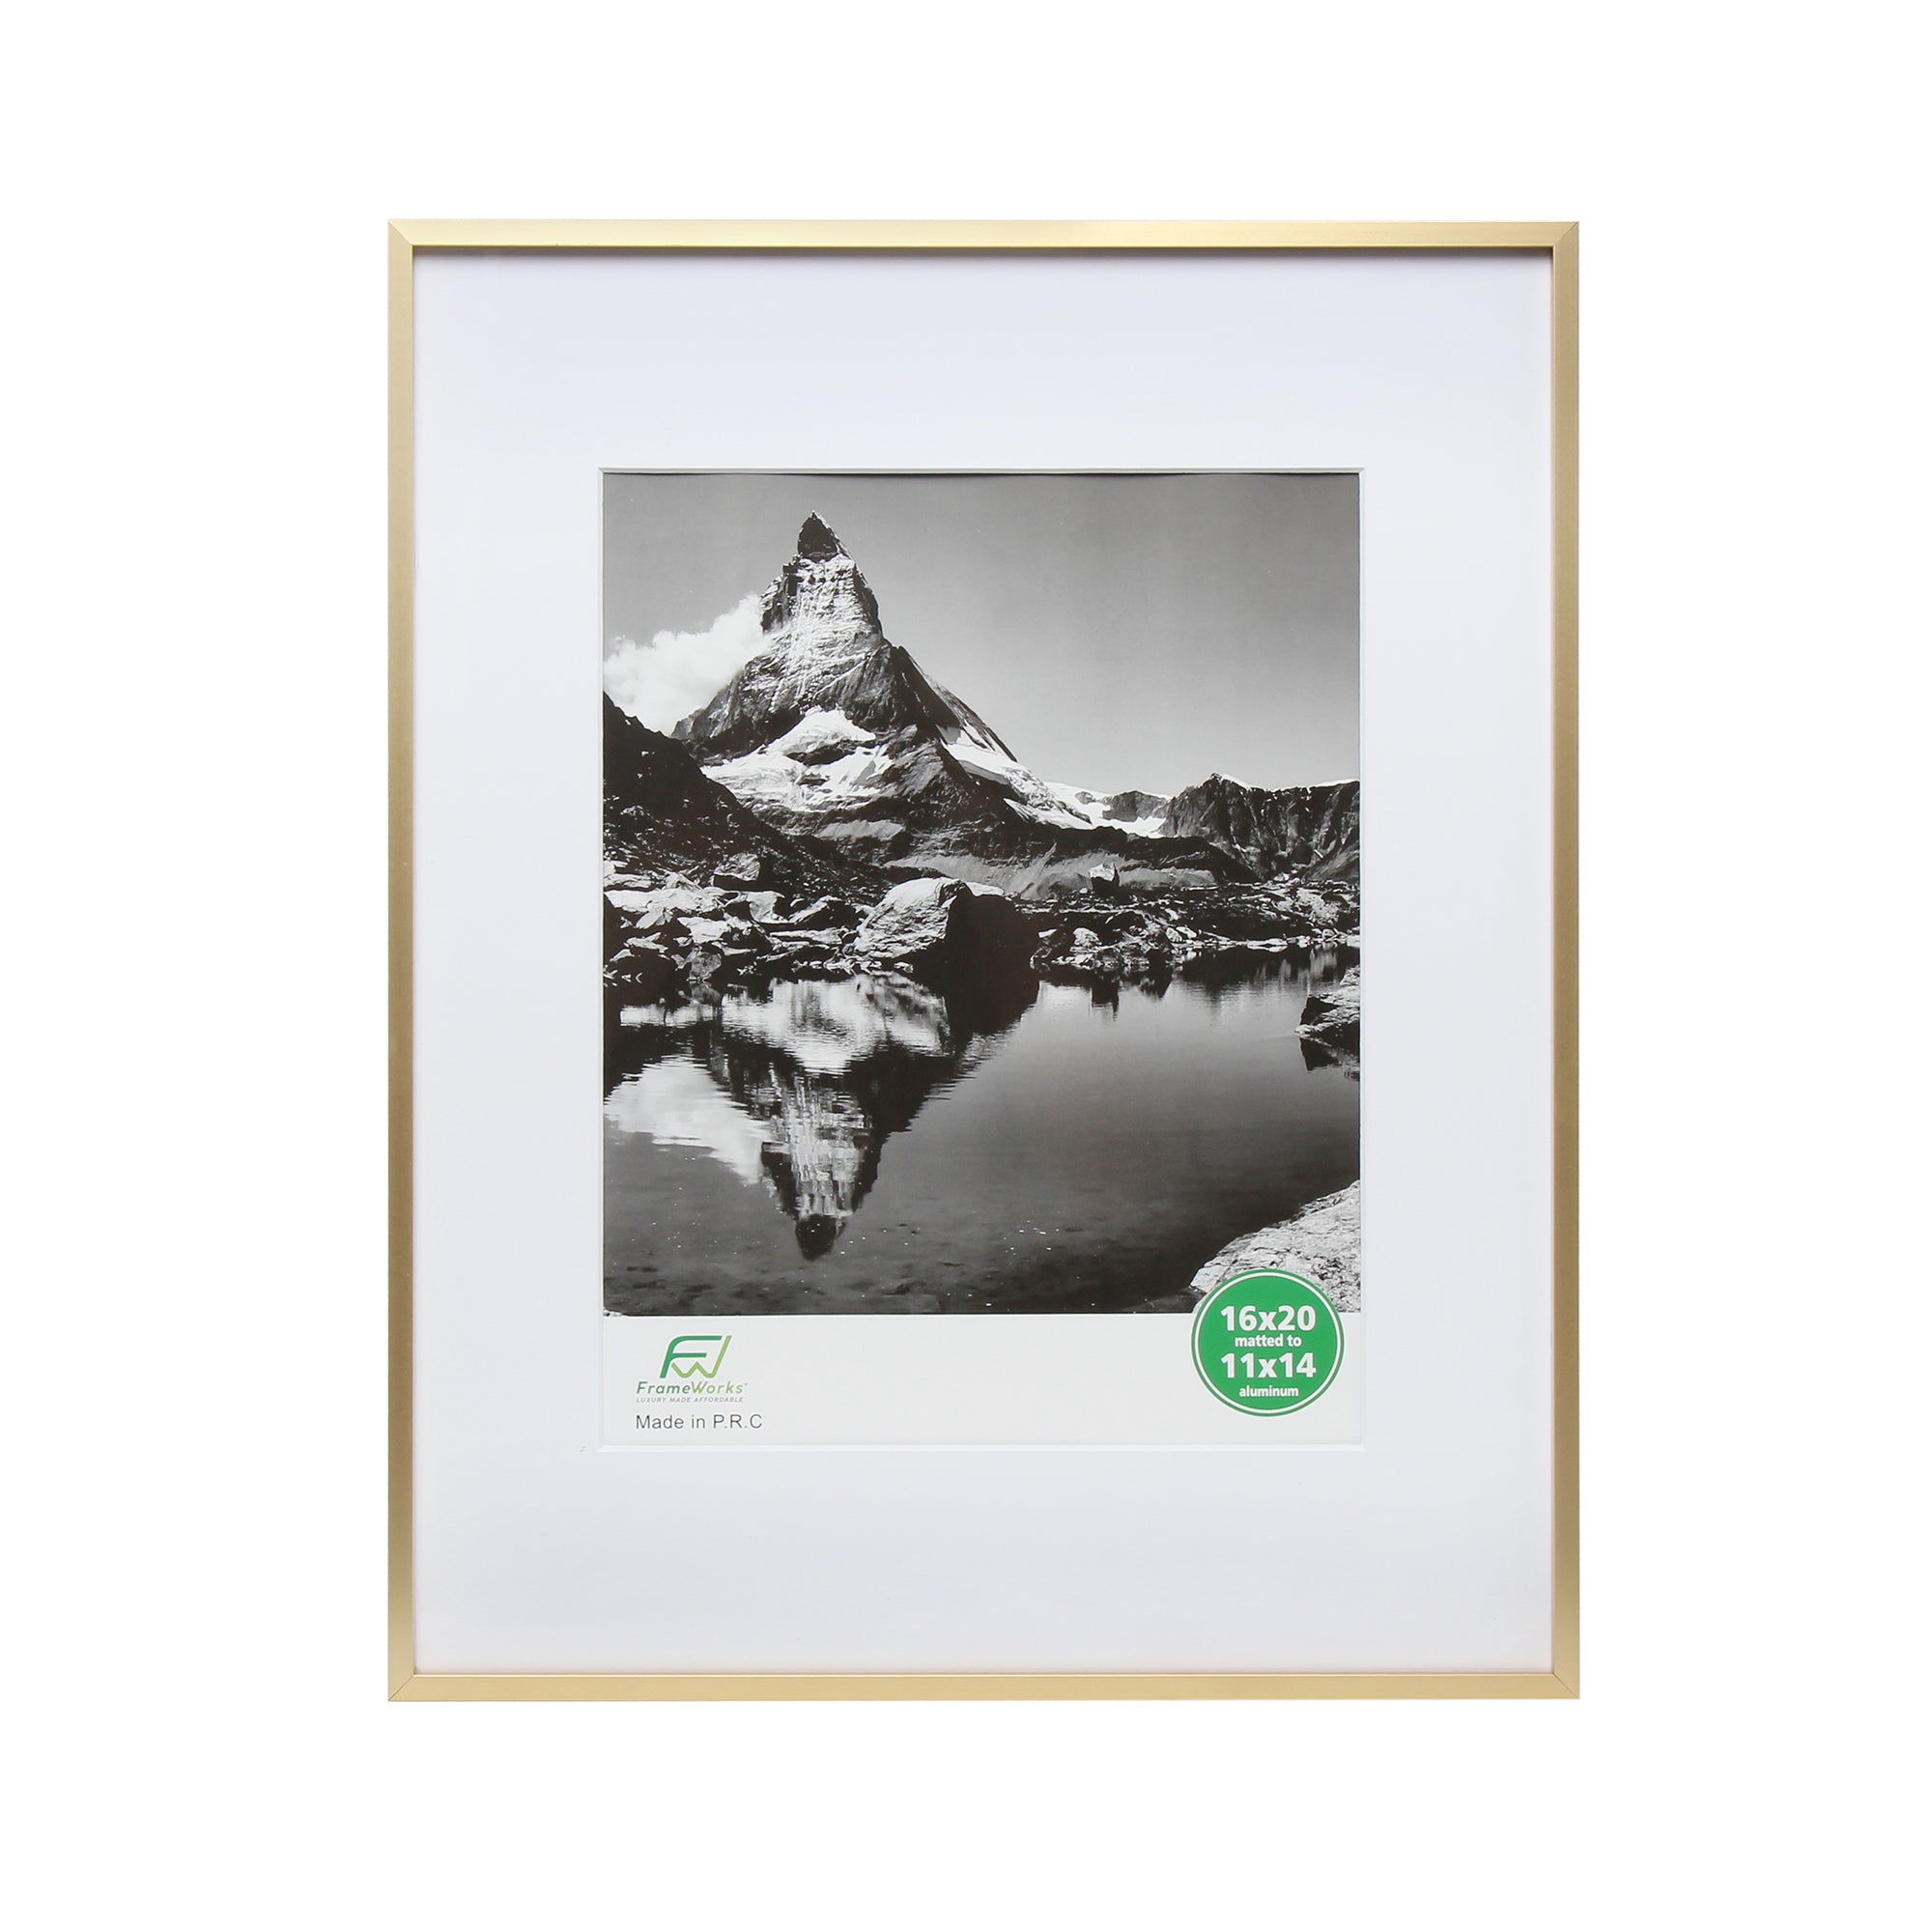 matted poster frame